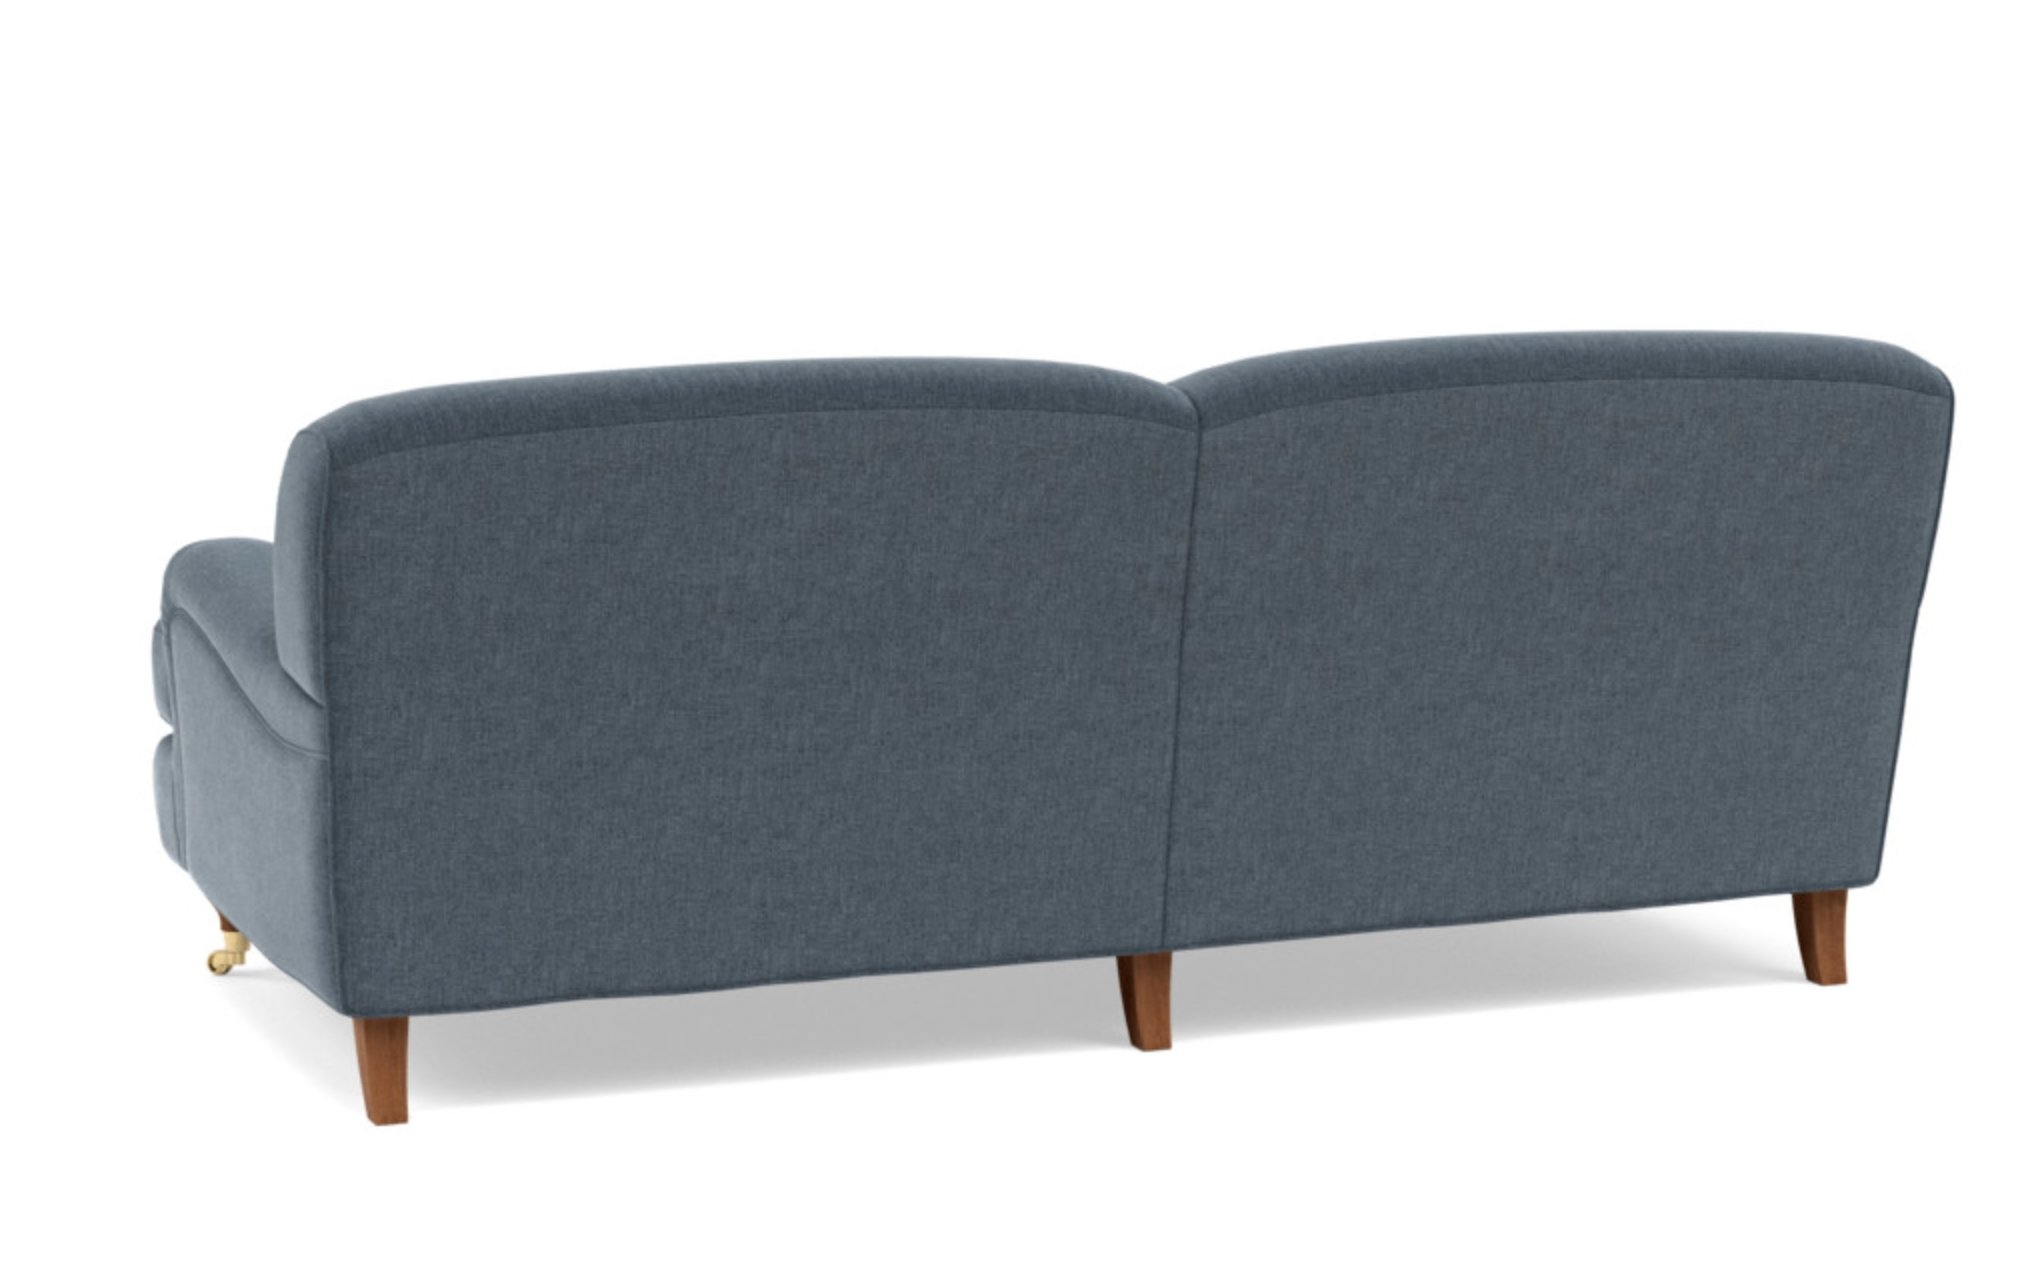 Rose by The Everygirl Sofa with Wave Performance Basket Weave Fabric and Oiled Walnut with Brass Caster Legs - Image 3